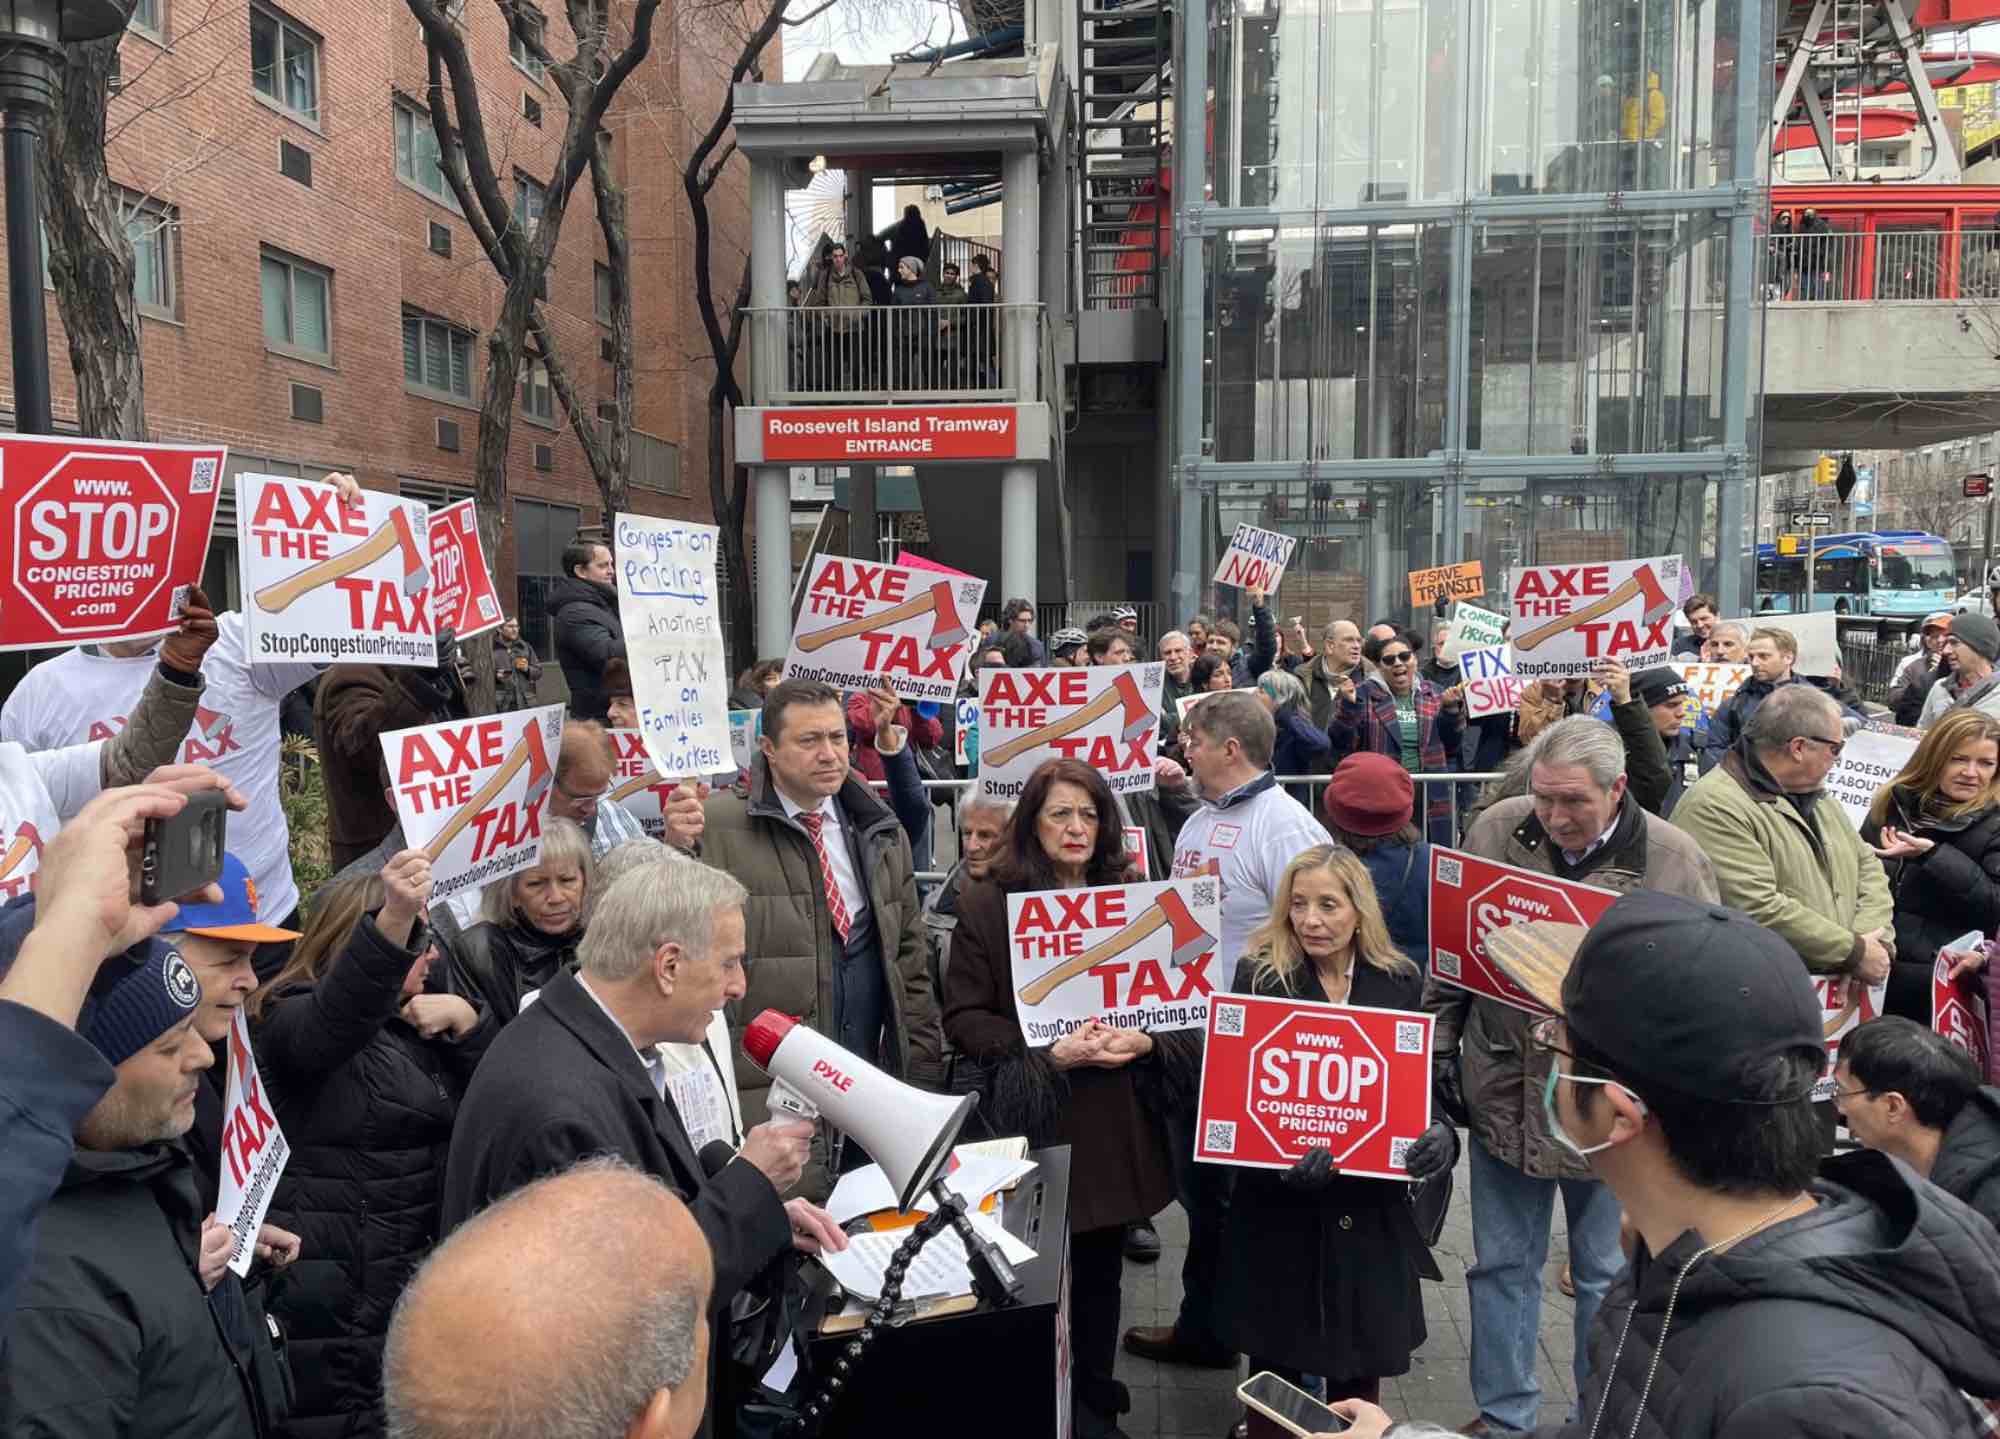 Opponents of congestion pricing try to rally as counterprotesters drown them out.